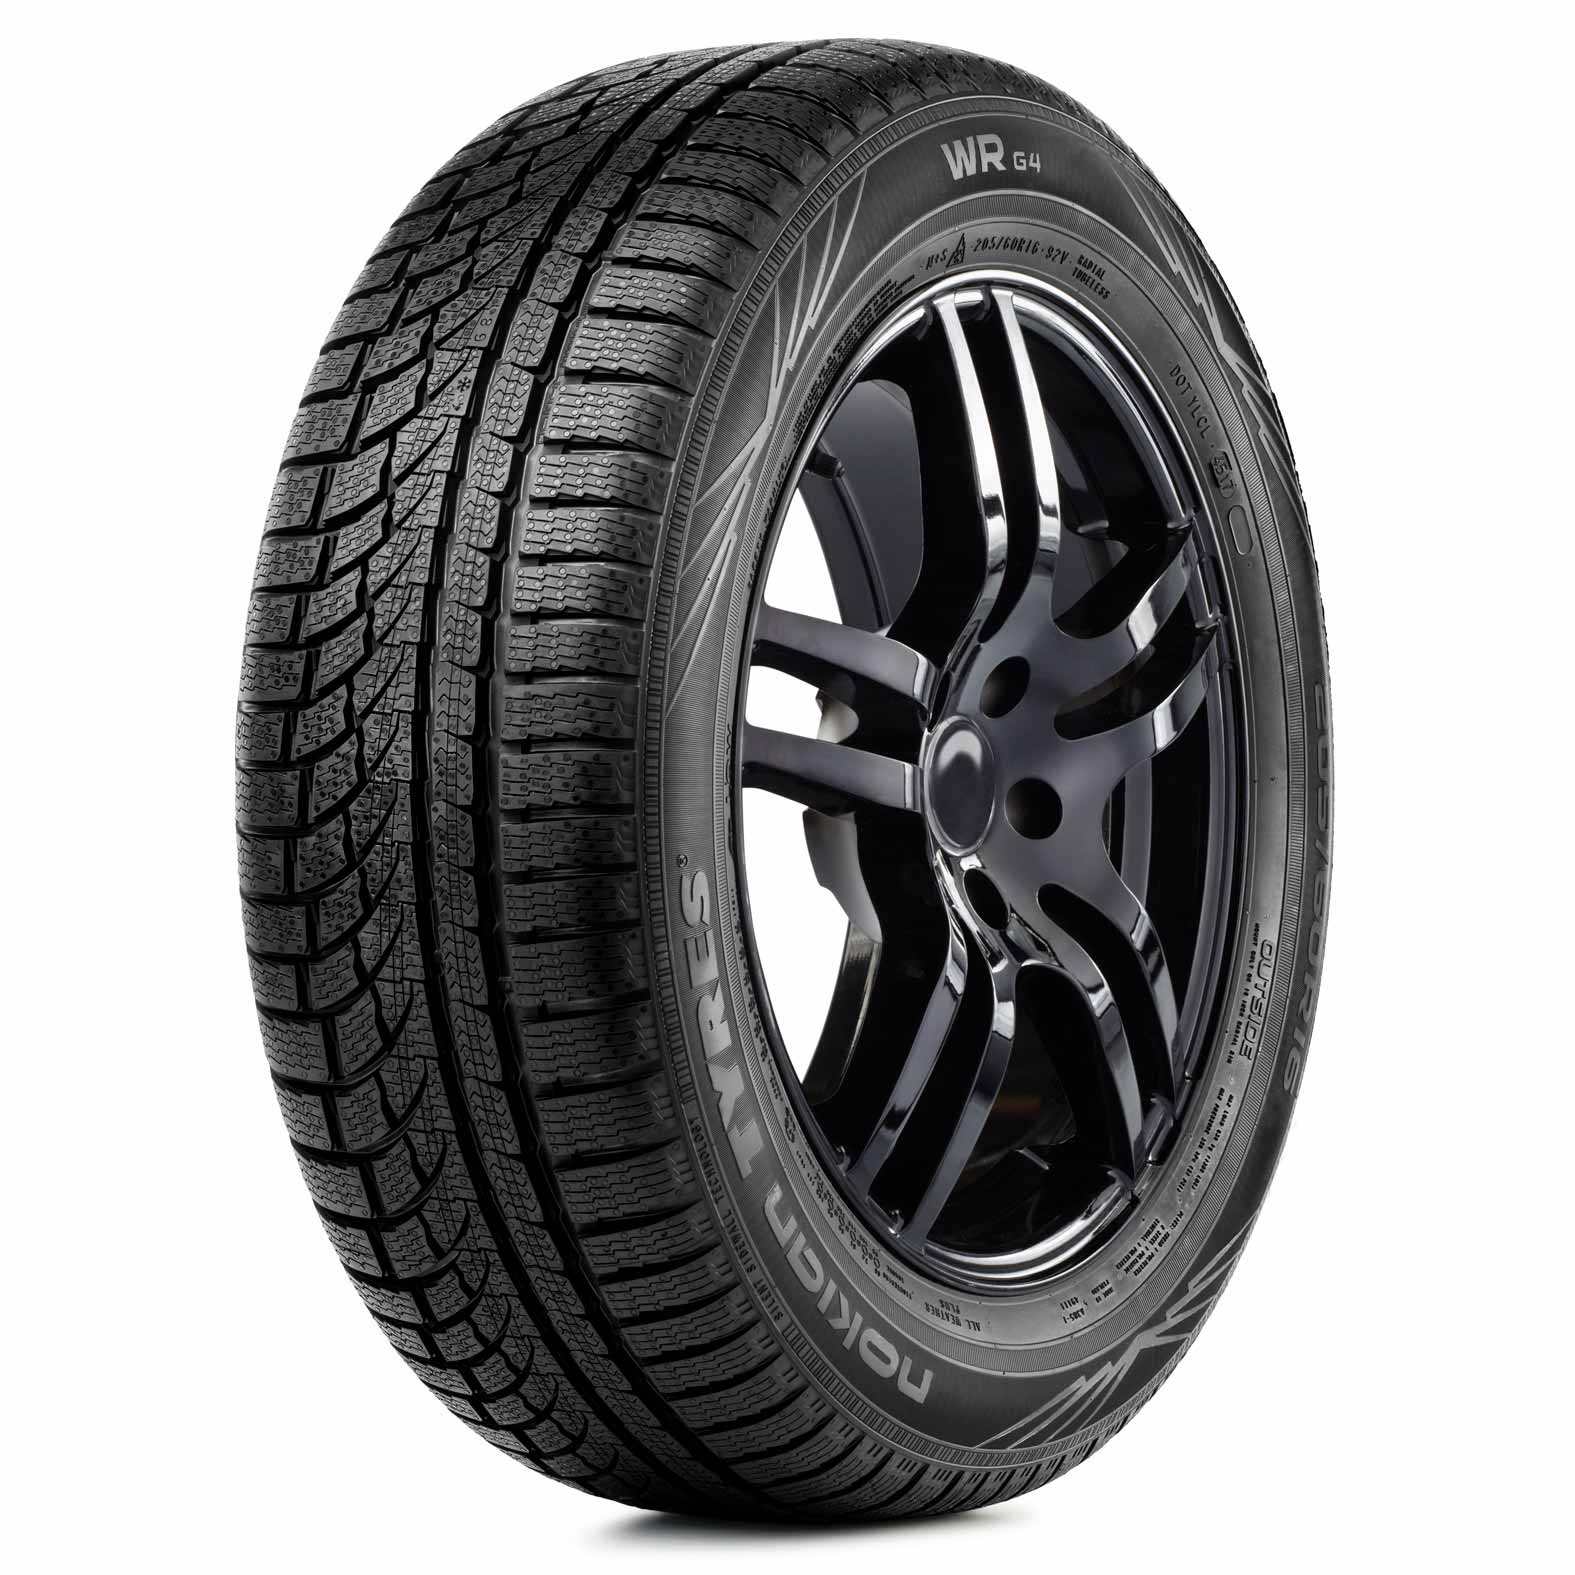 Tire WRG4 | All-Weather for Tires Kal Nokian